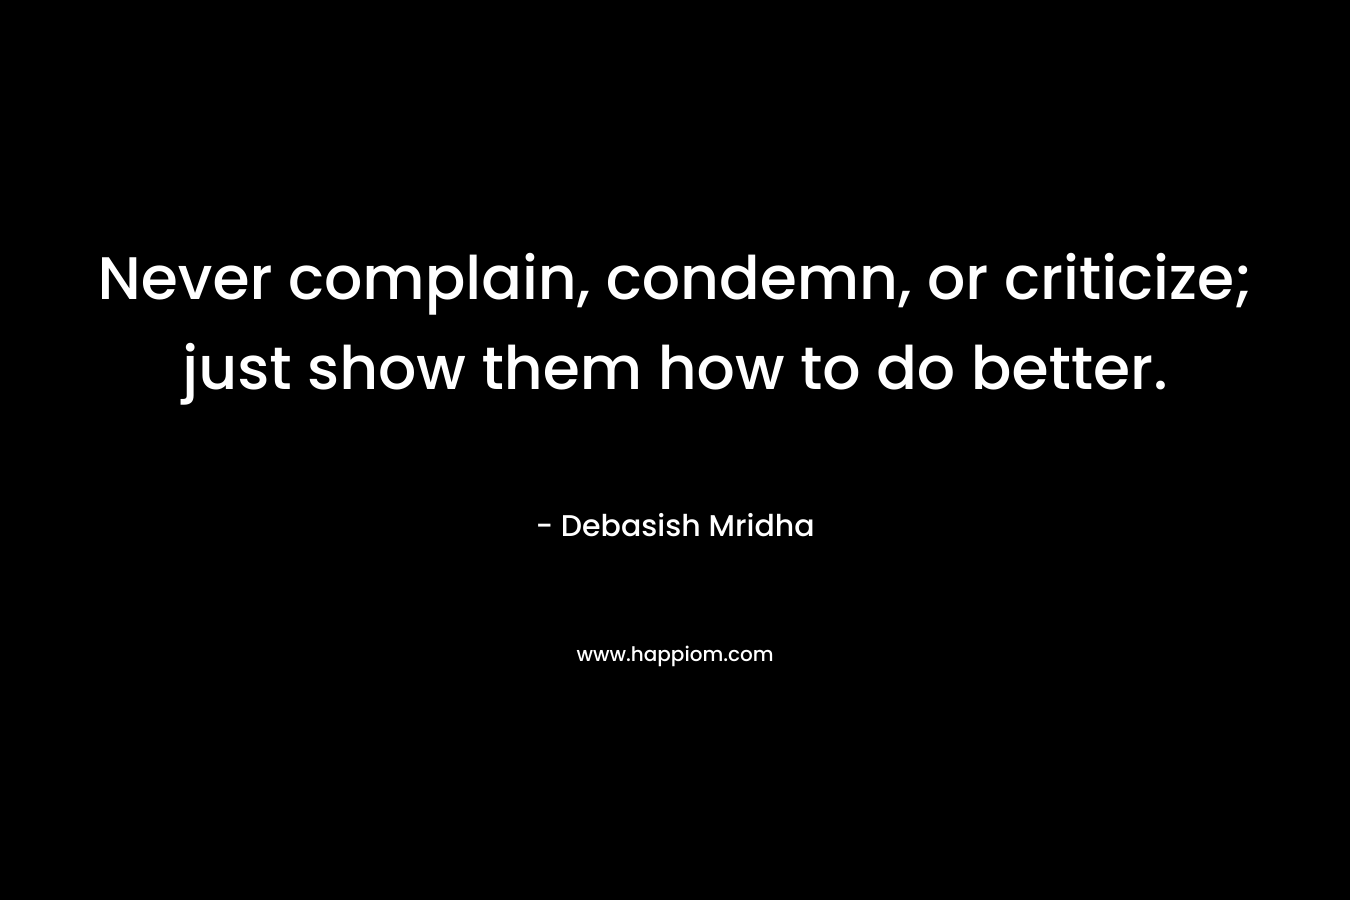 Never complain, condemn, or criticize; just show them how to do better.